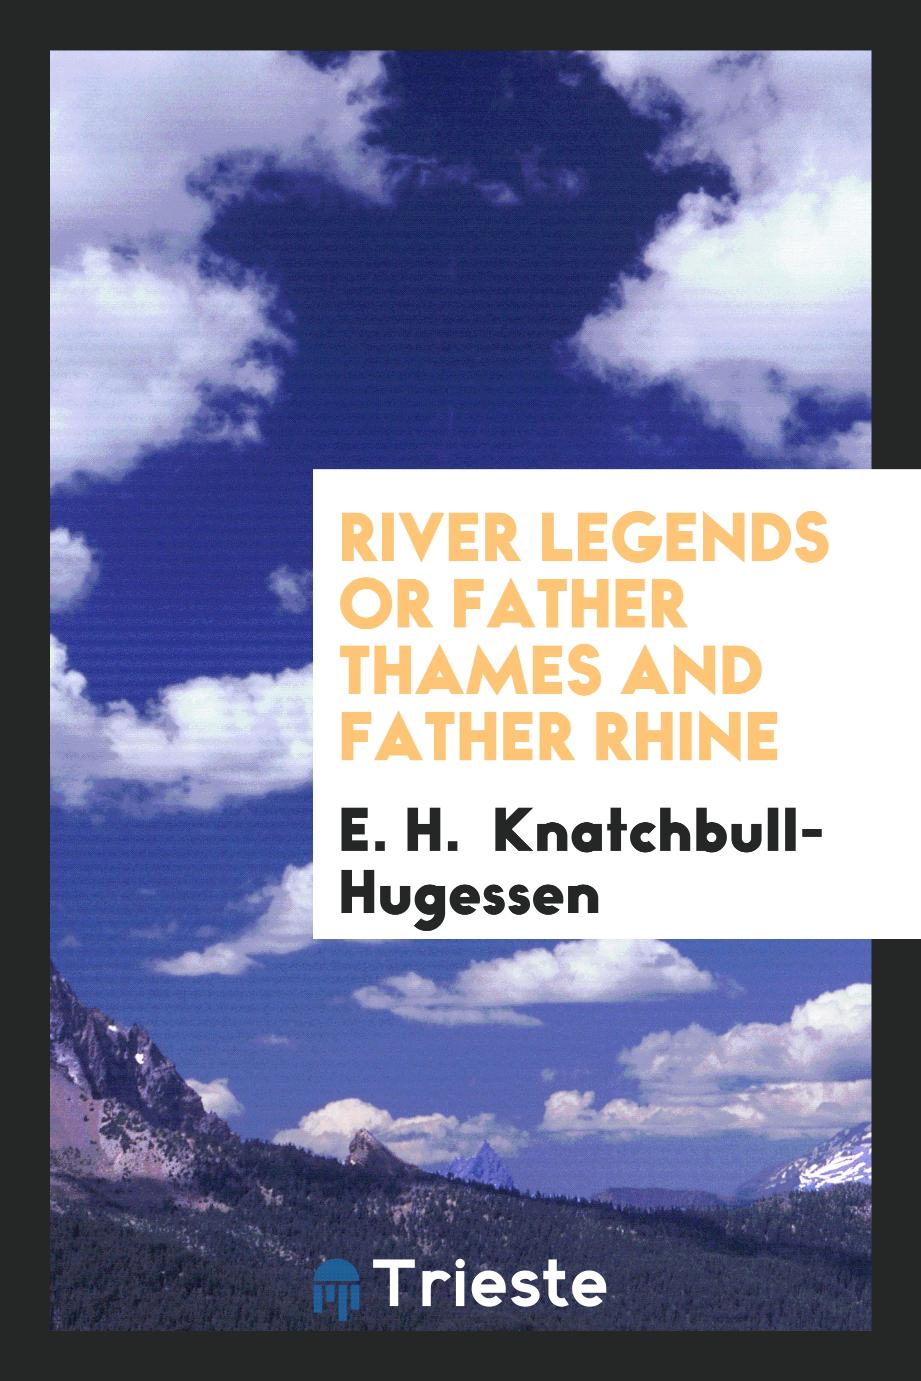 River legends or Father Thames and Father Rhine